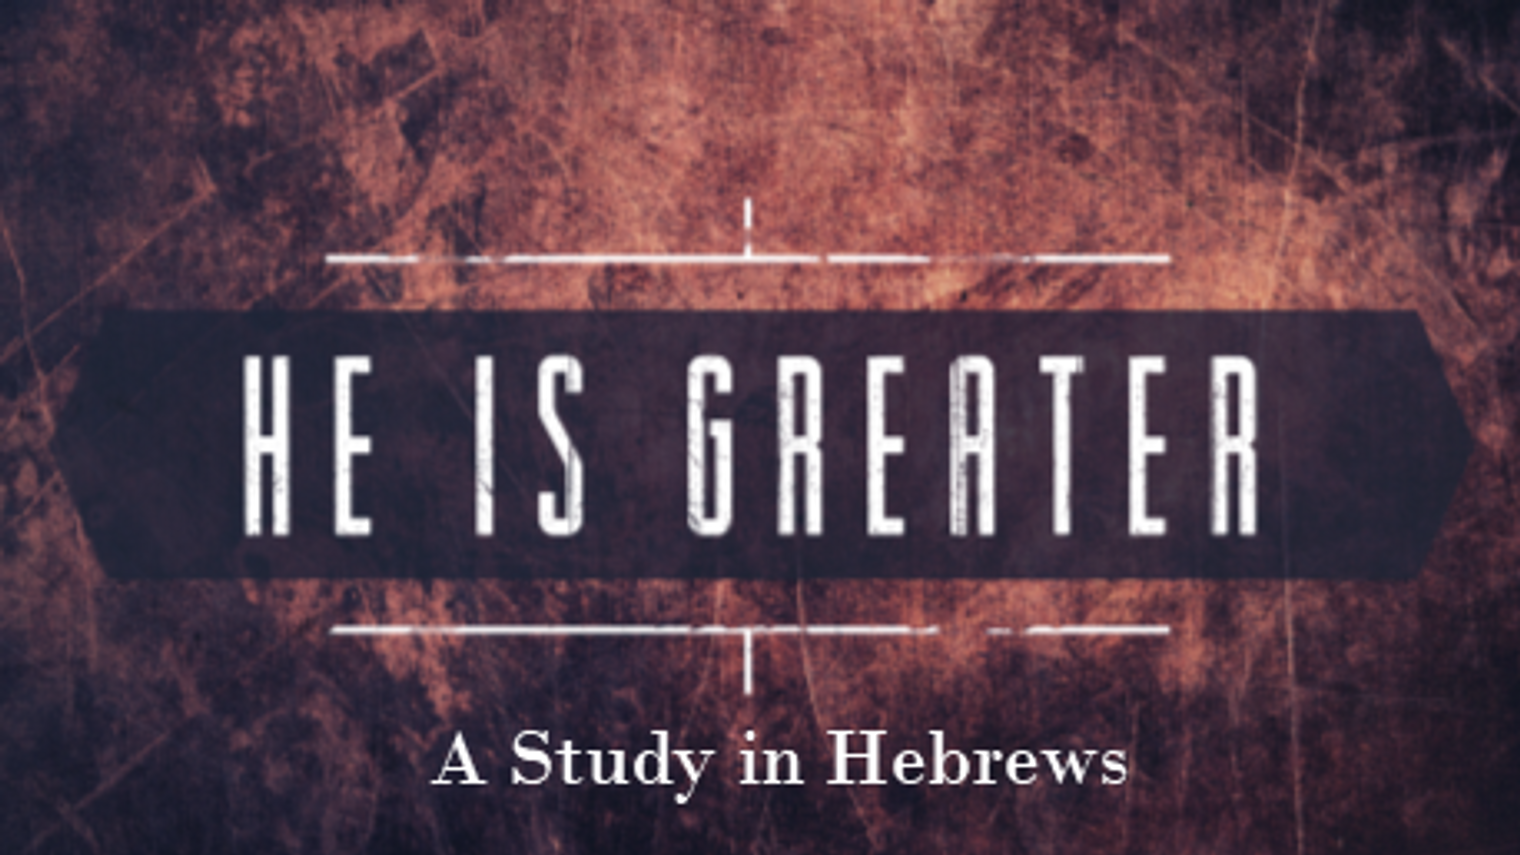 He is Greater - A Study in Hebrews